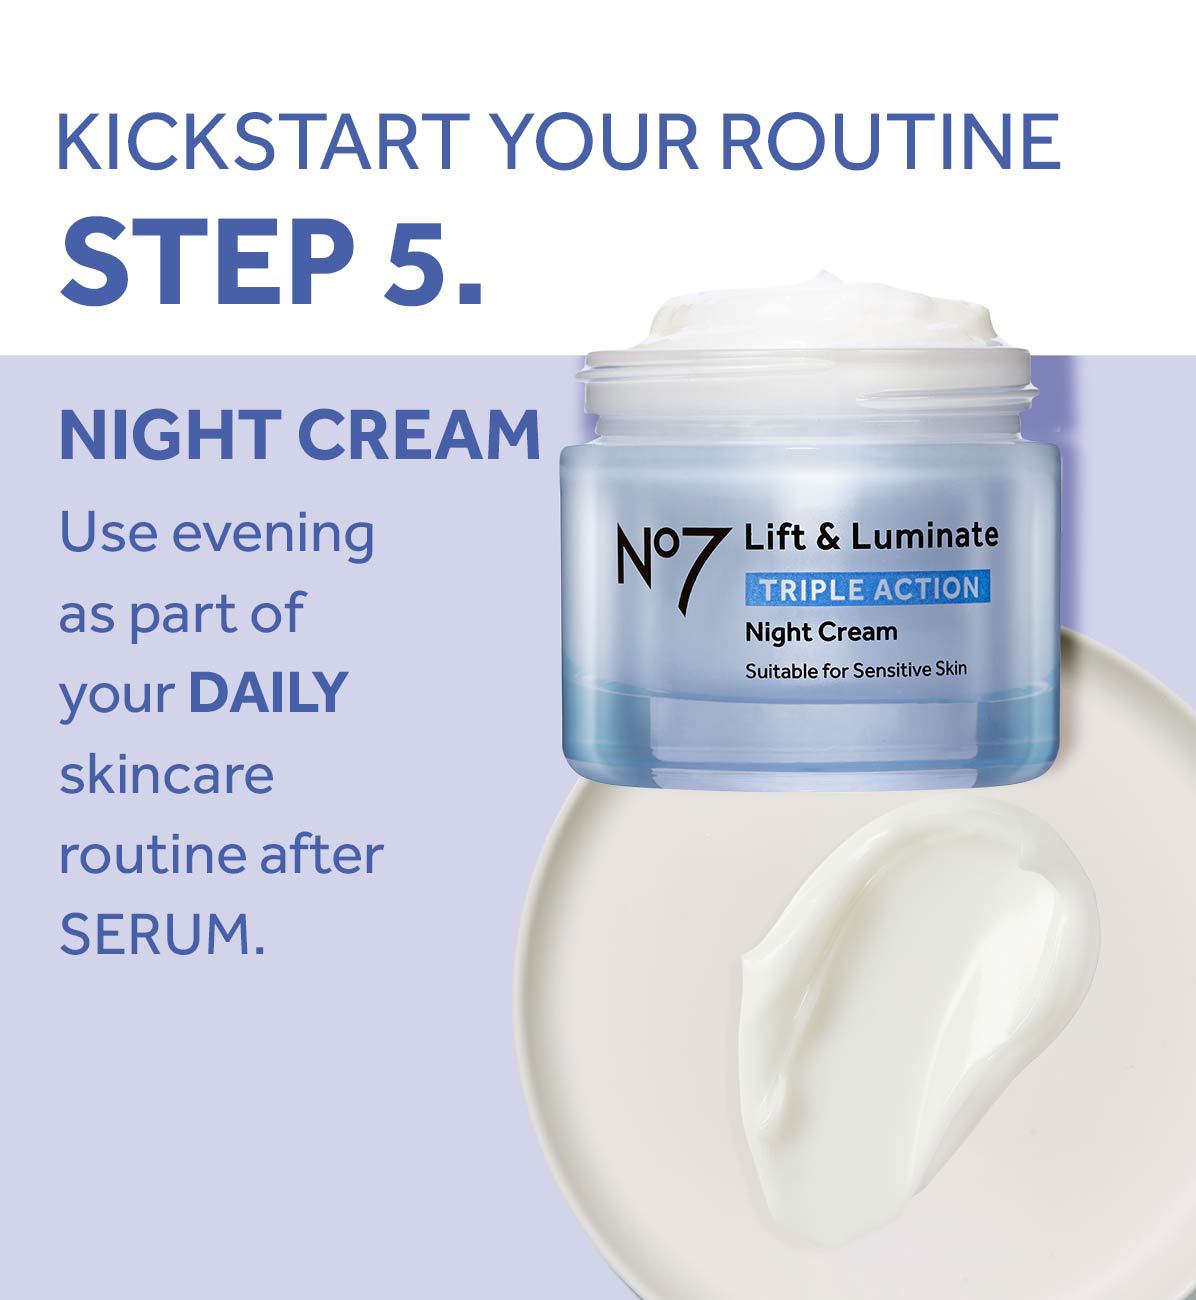 KICKSTART YOUR ROUTINESTEP 5.NIGHT CREAMUse evening as part of your DAILY skincare routine afterSERUM.